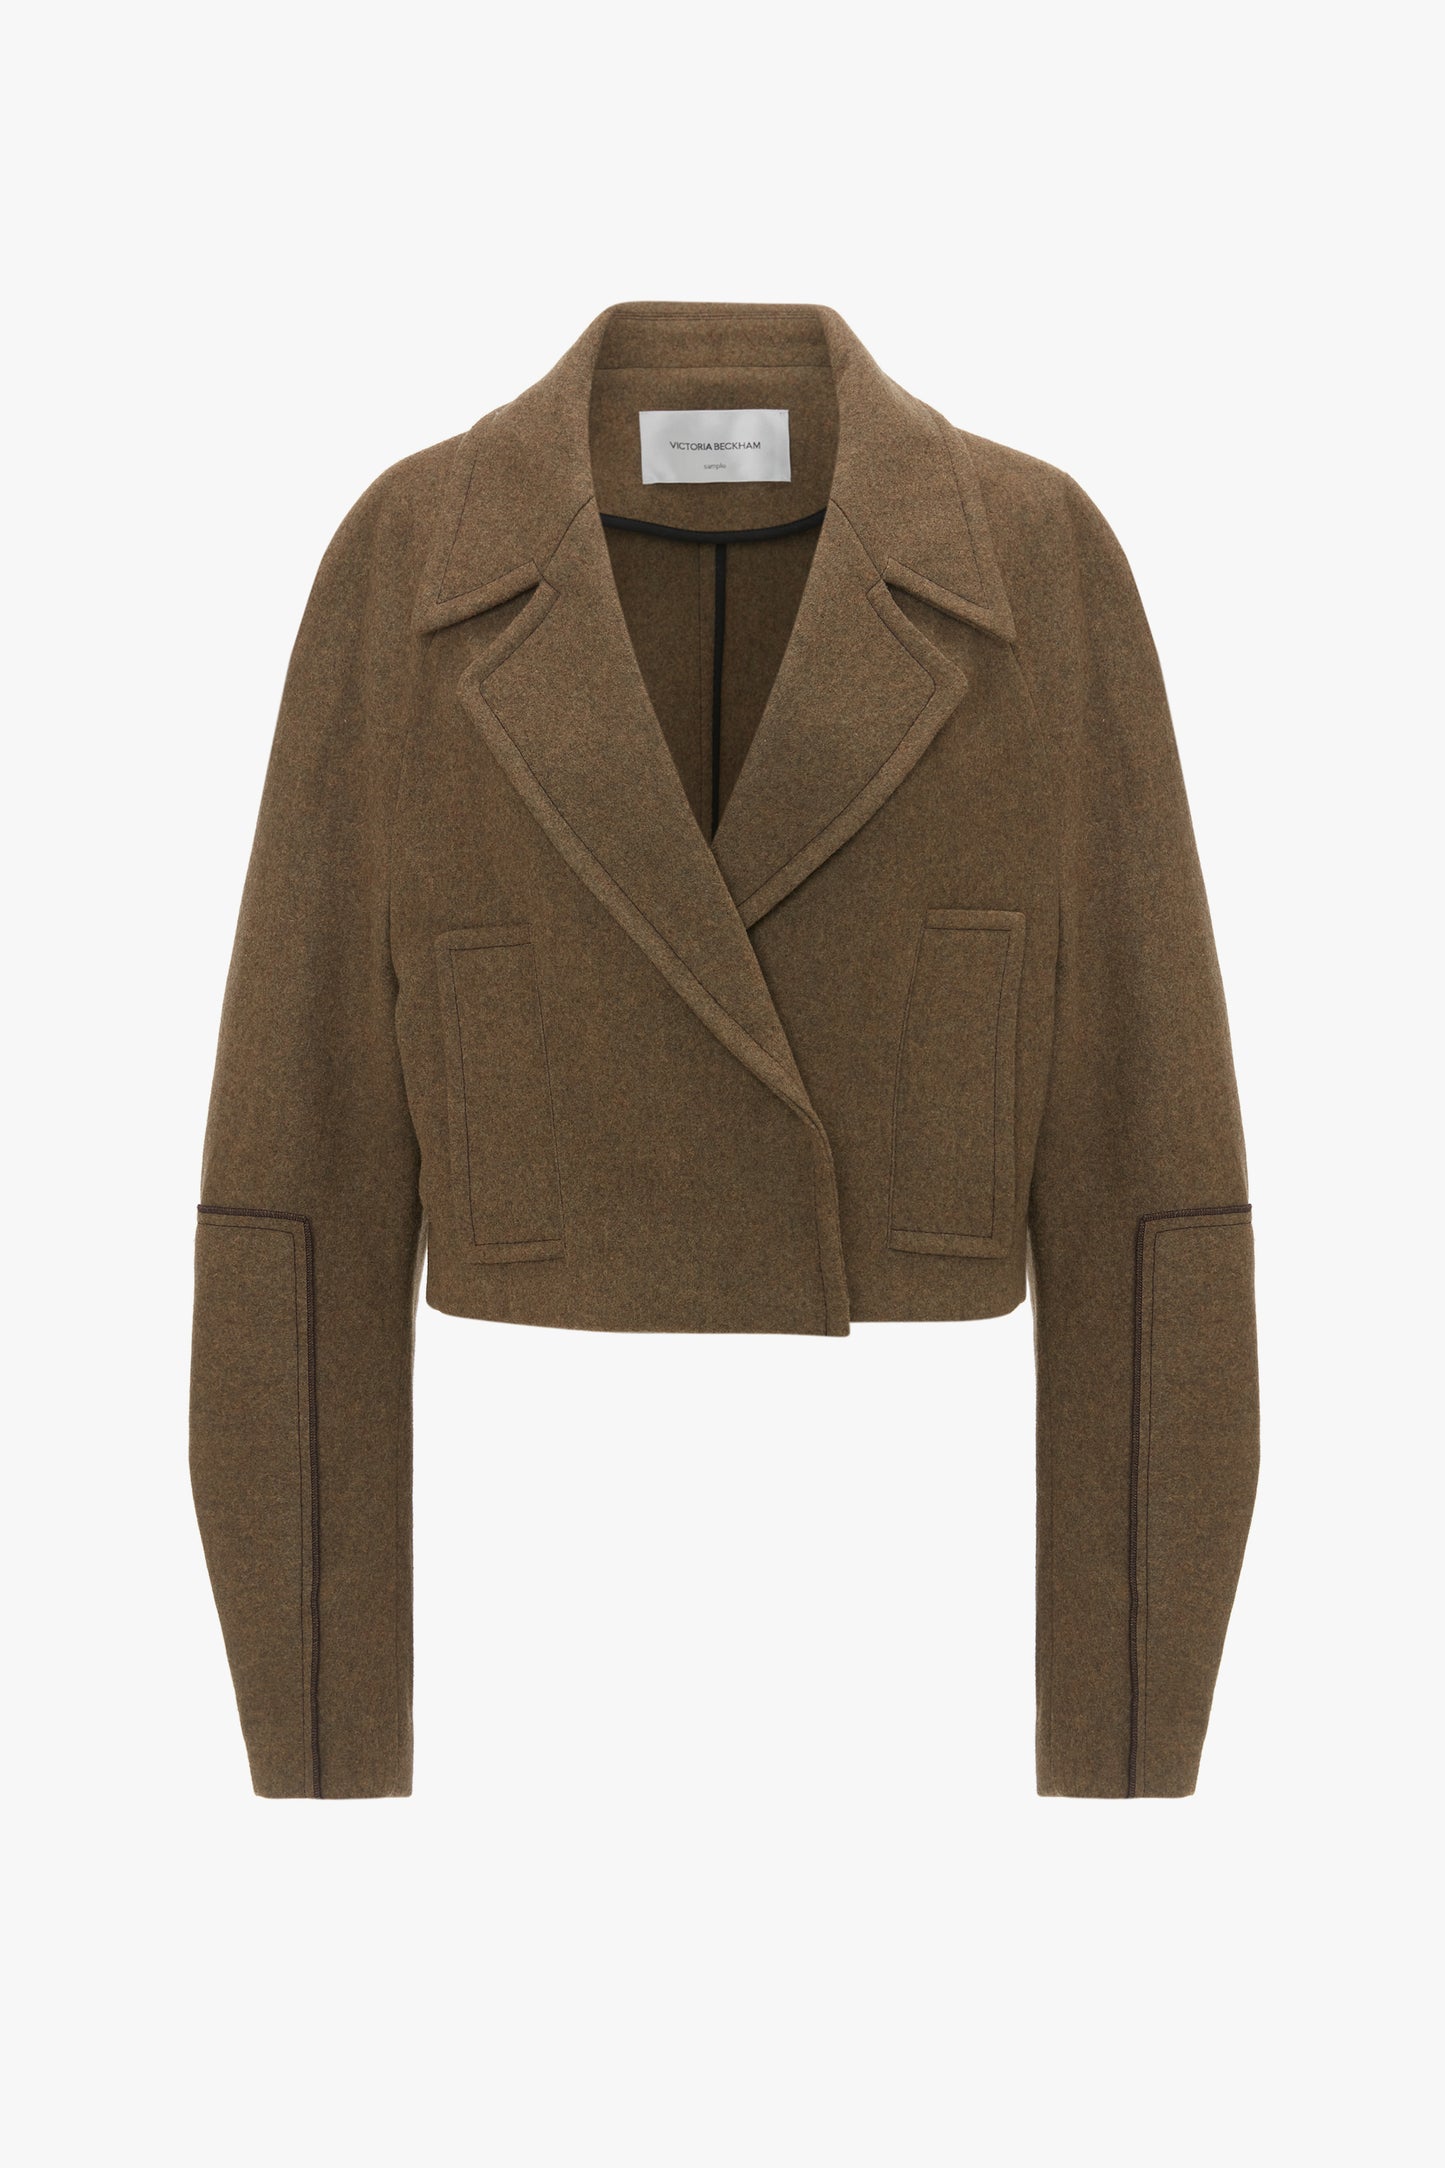 A Cropped Pea Coat In Khaki from Victoria Beckham, made of Merino wool, featuring a wide lapel collar and front patch pockets, with long sleeves and a minimalist design.